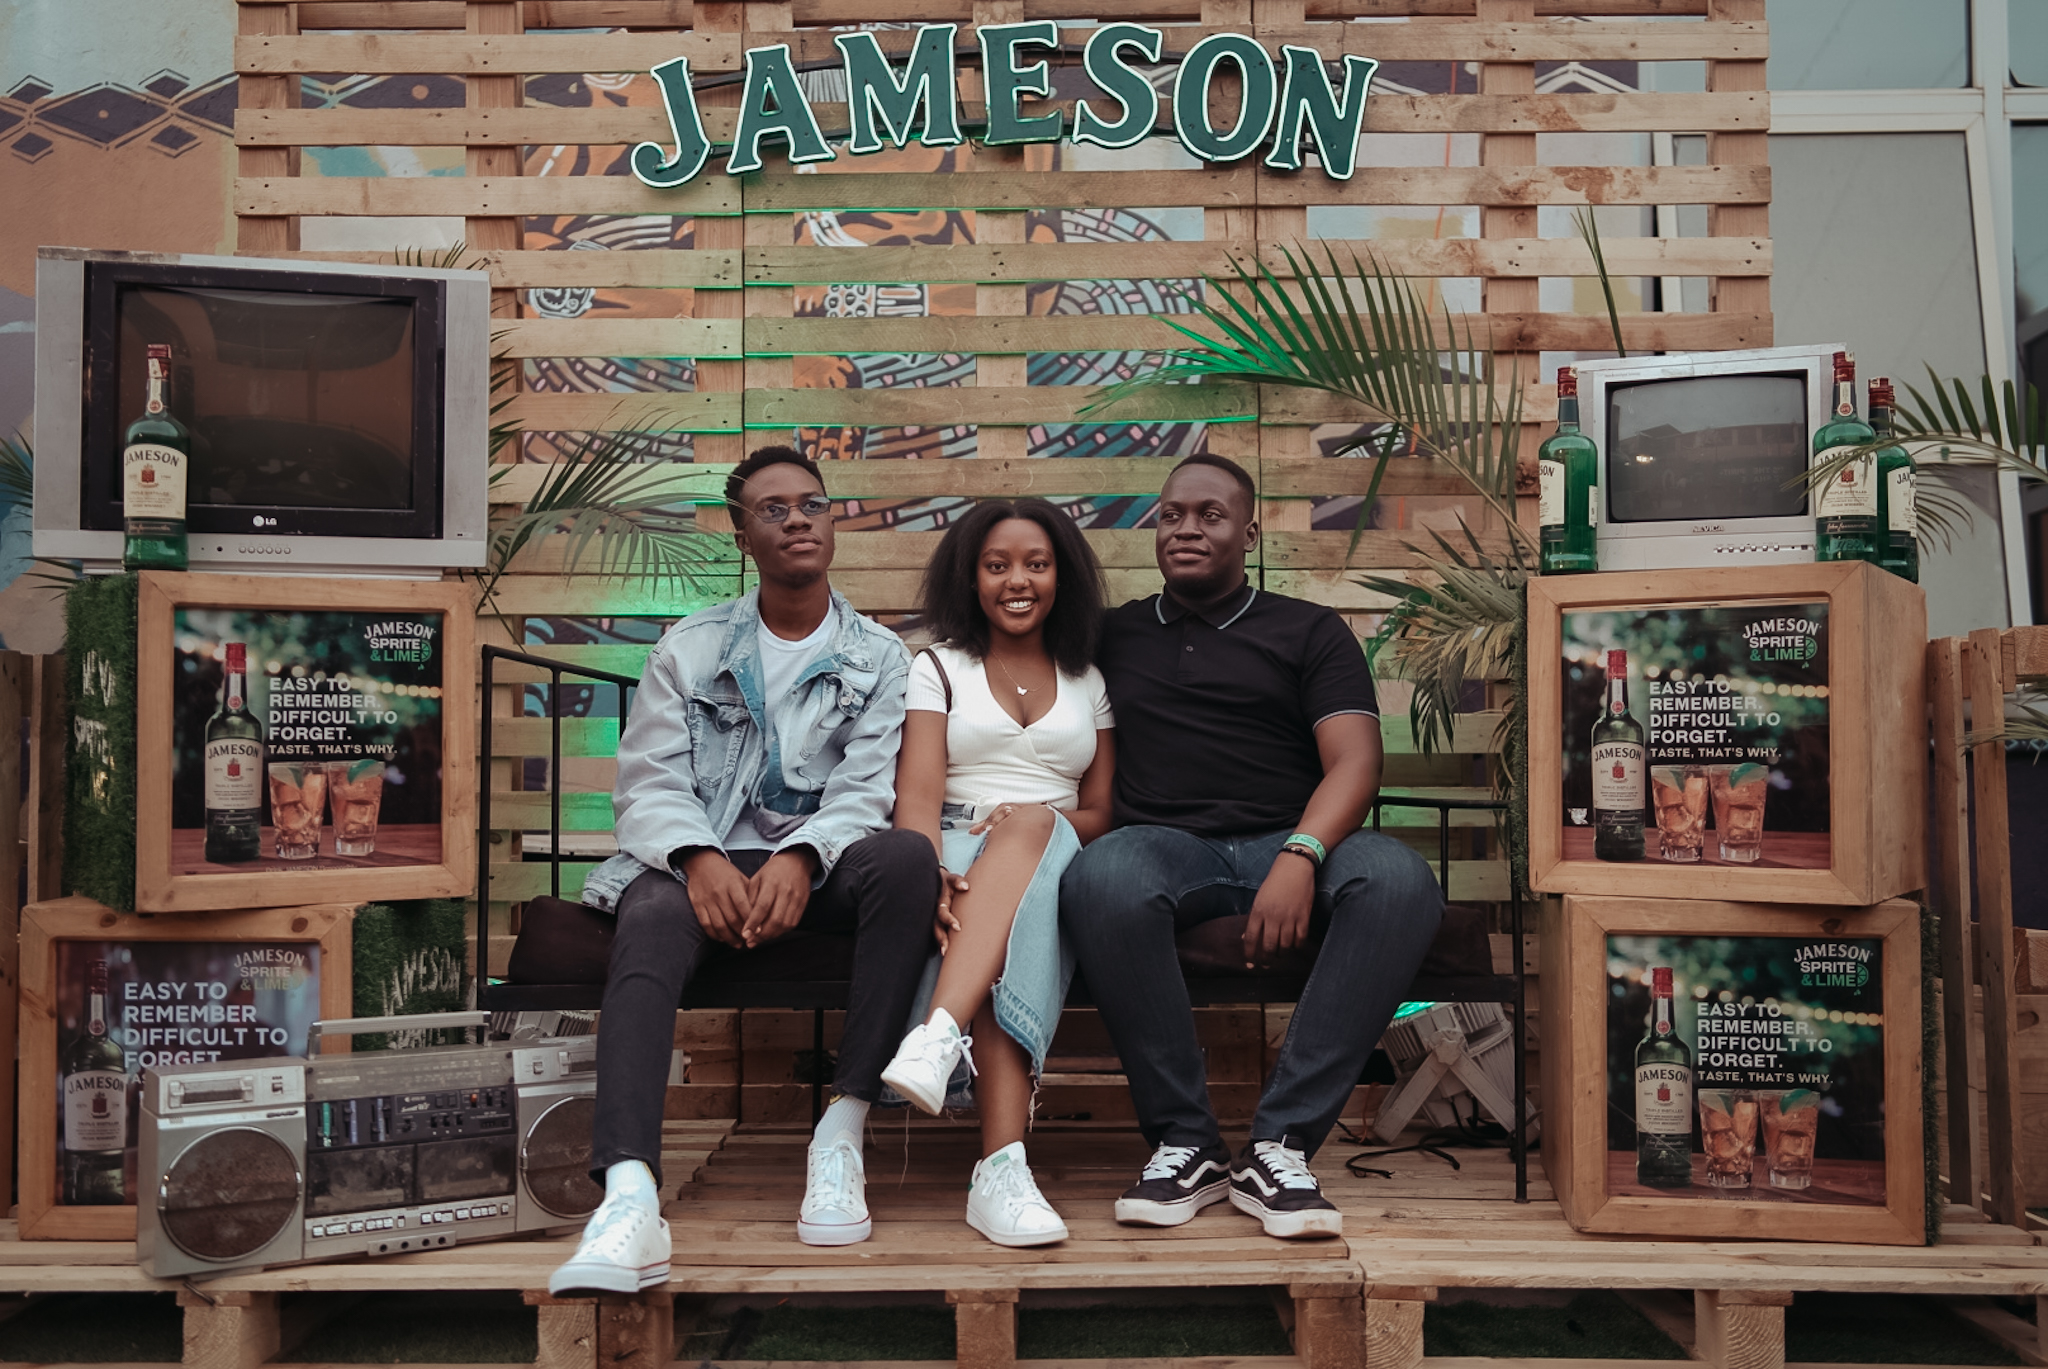 JAMESON and FRIENDS returns Bigger and Better this Year